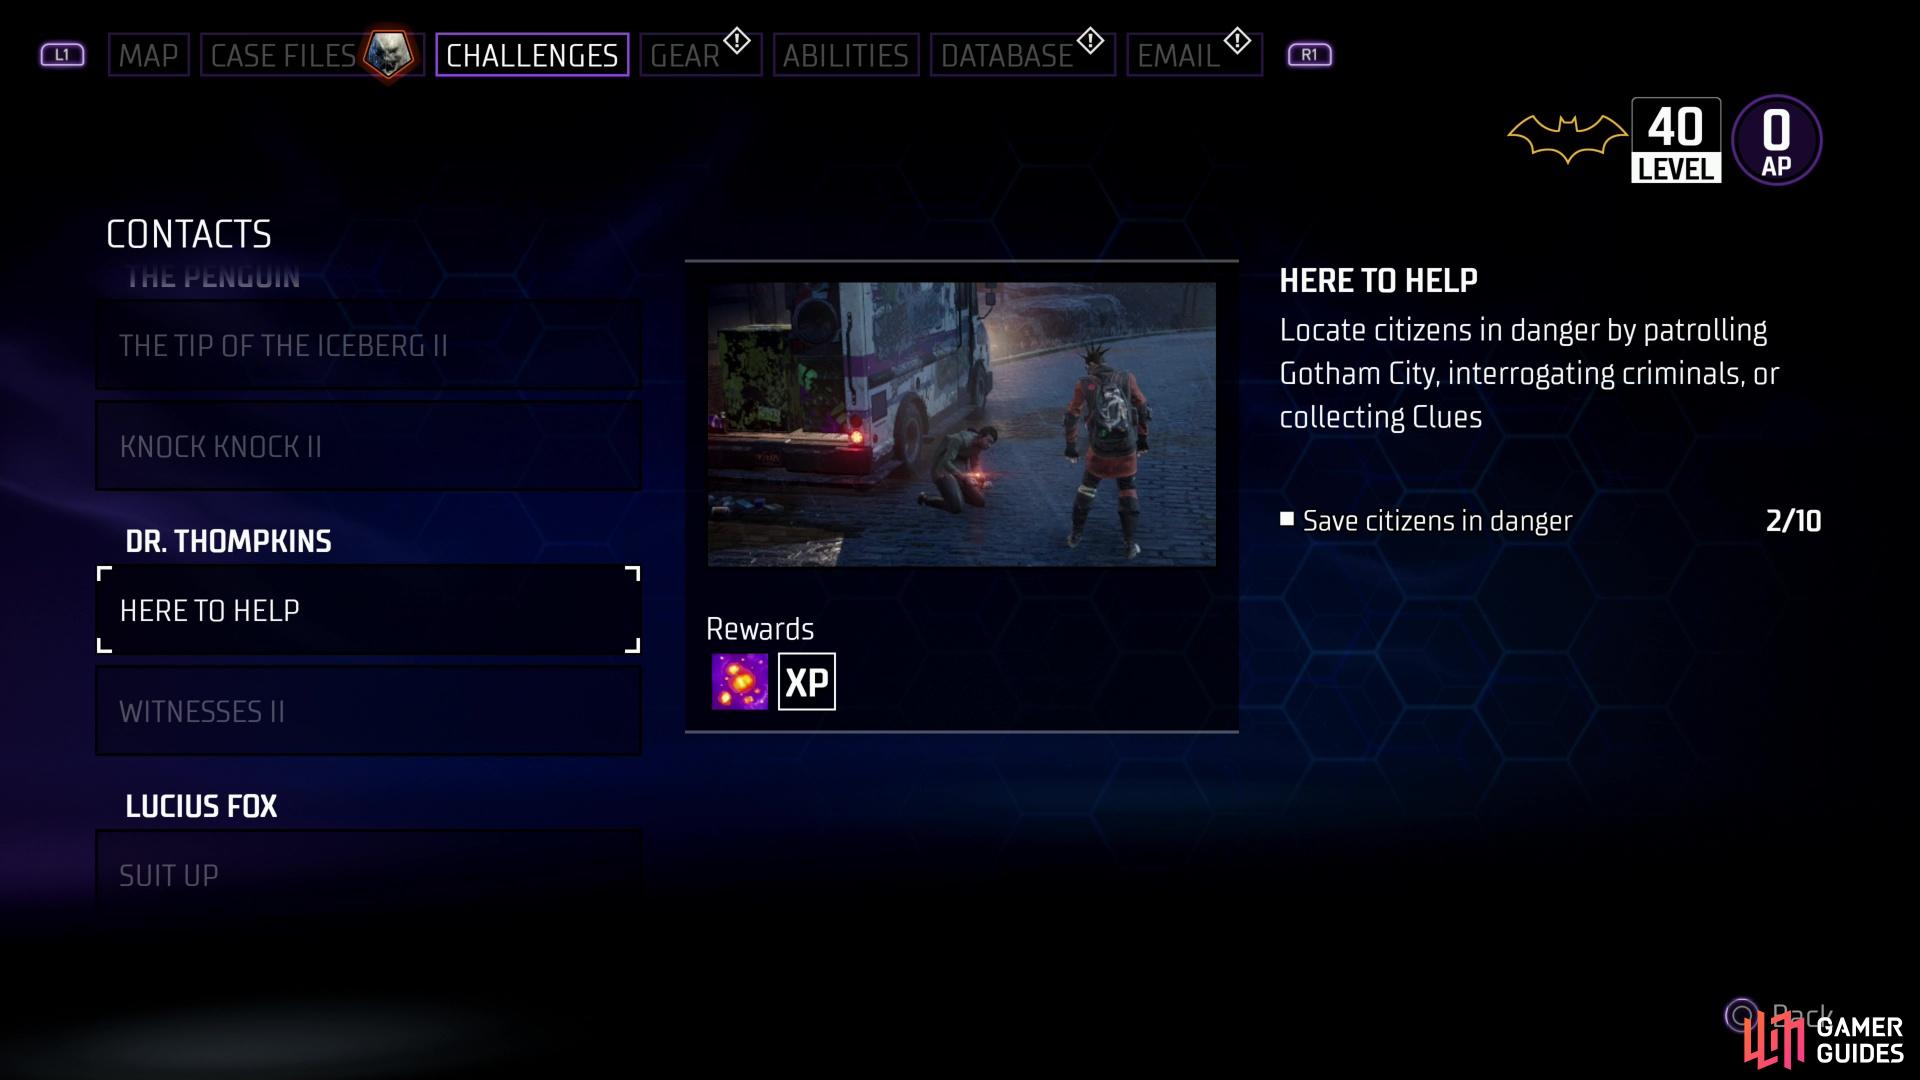 Challenges reward you for completing various objectives, most of which you’ll complete naturally just by clearing crimes throughout Gotham City.